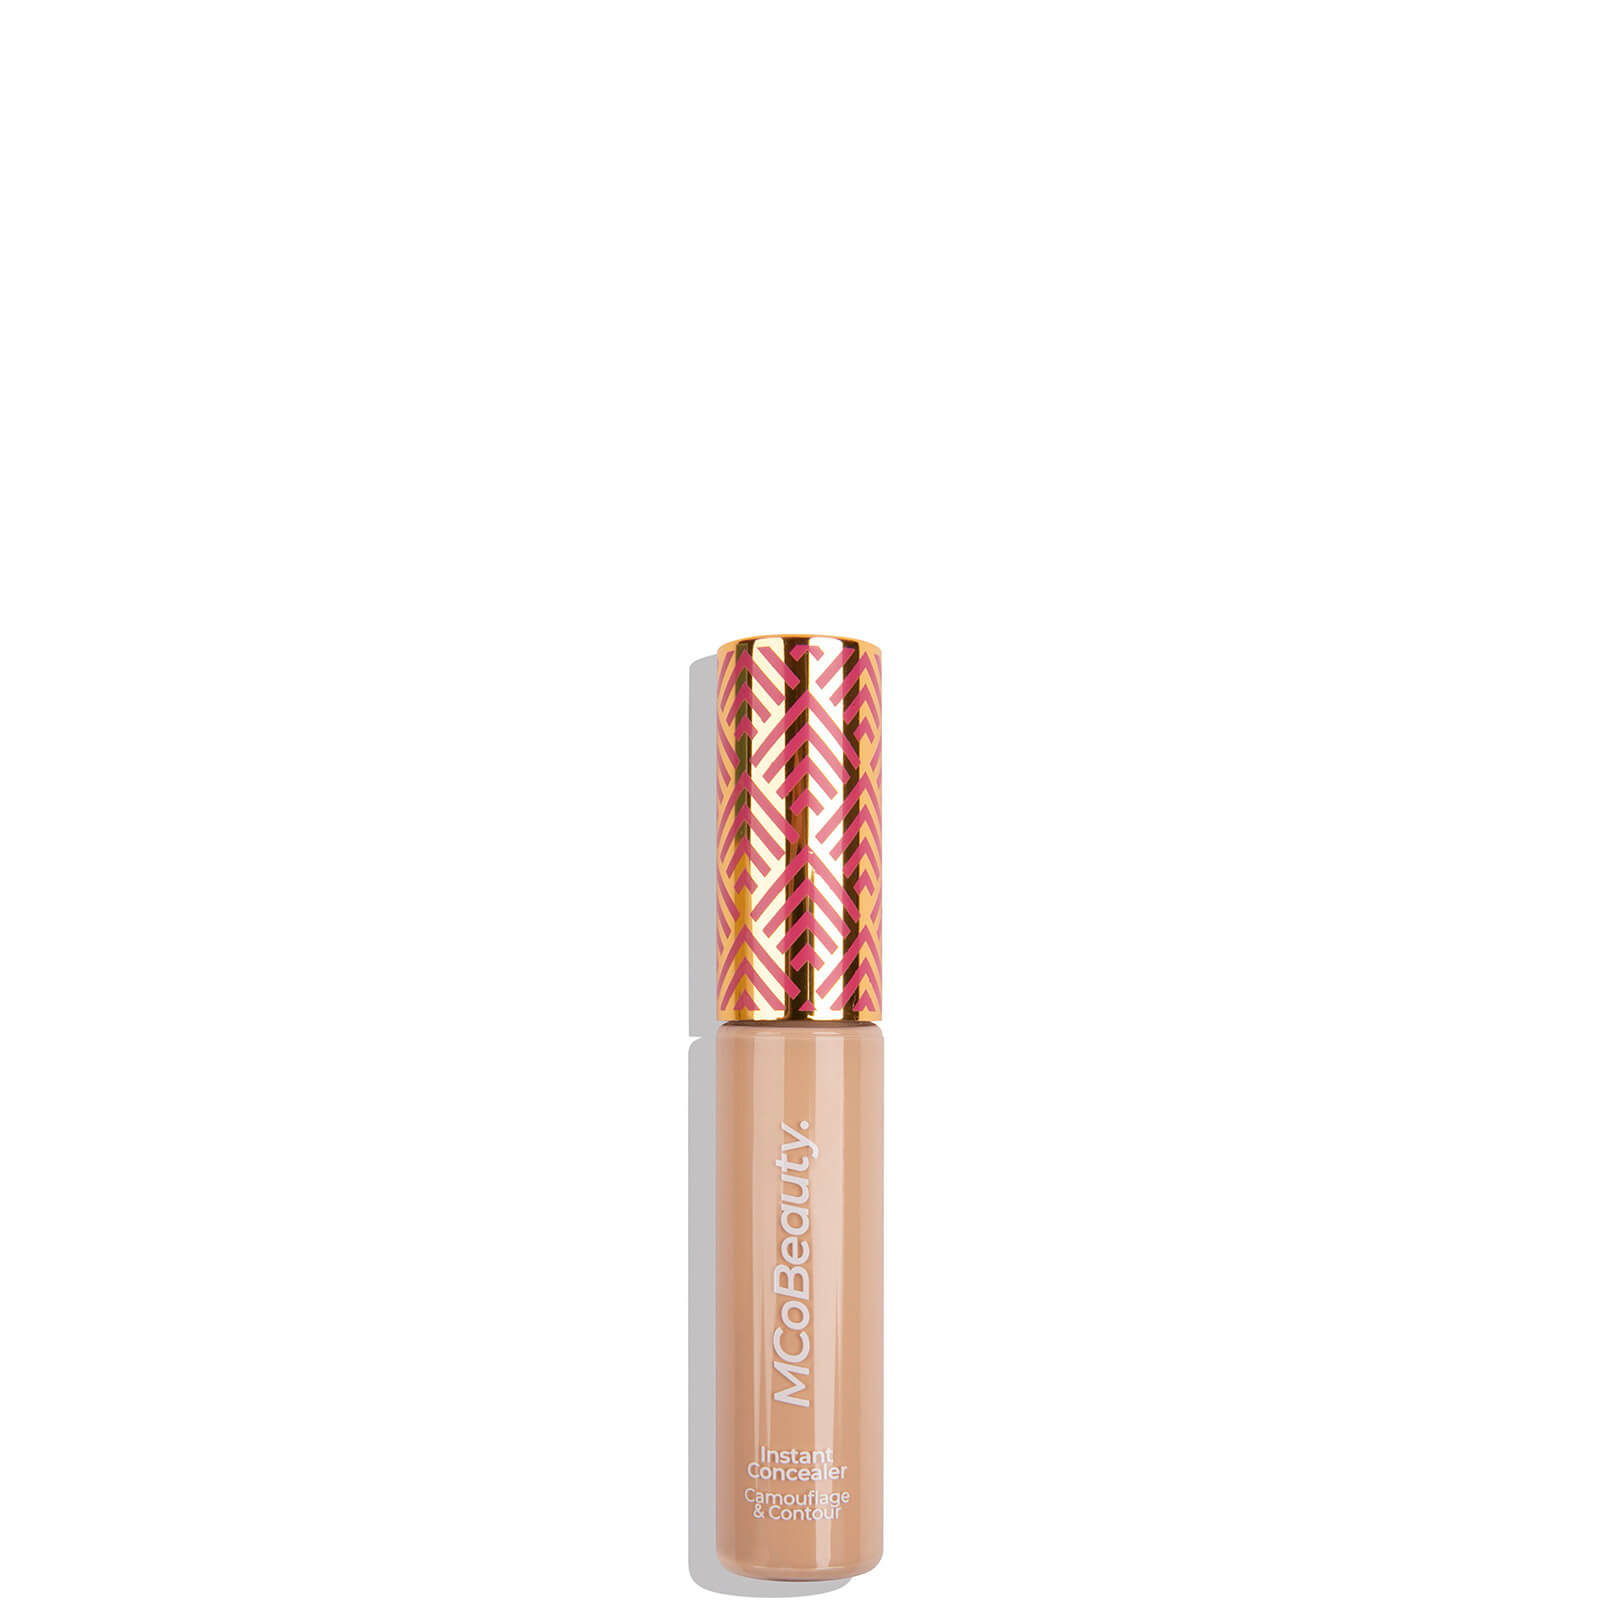 MCoBeauty Instant Concealer Camouflage and Contour 10ml (Various Shades) - Light